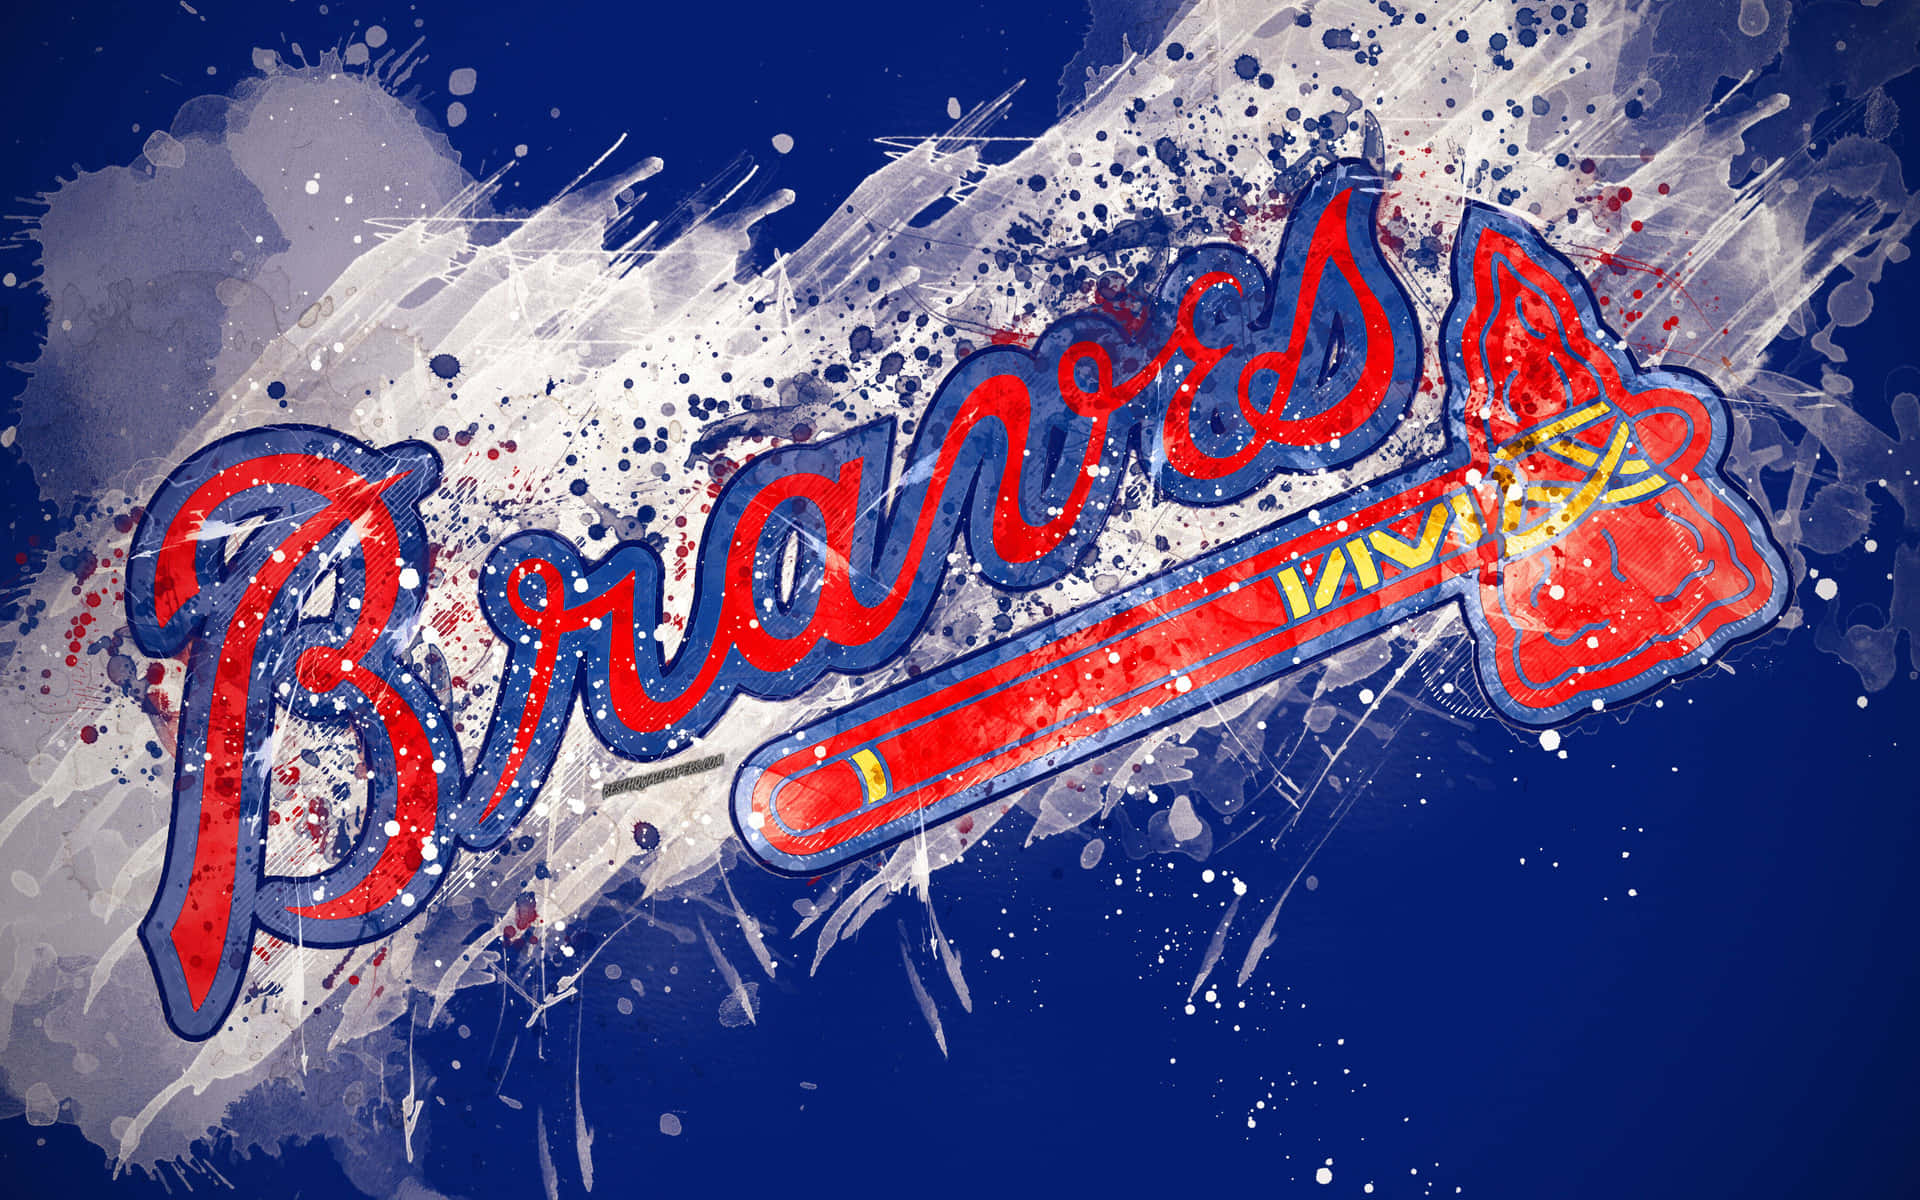 Come Out Swinging -- The Atlanta Braves Ready for a Great Game Wallpaper